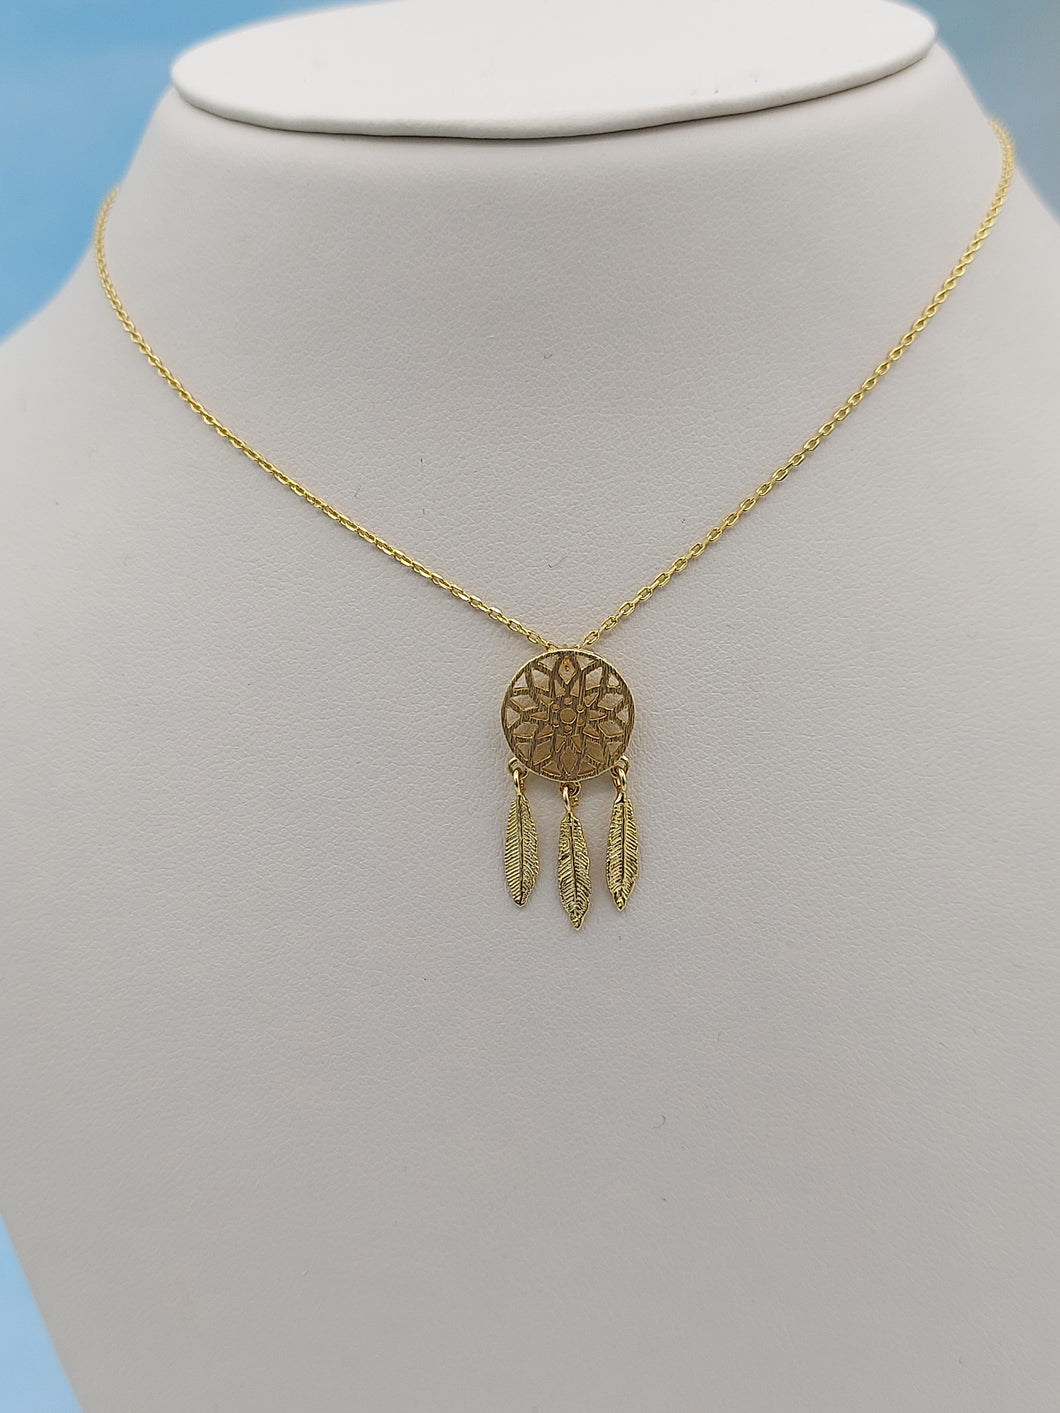 Dream Catcher Gold Plated Necklace